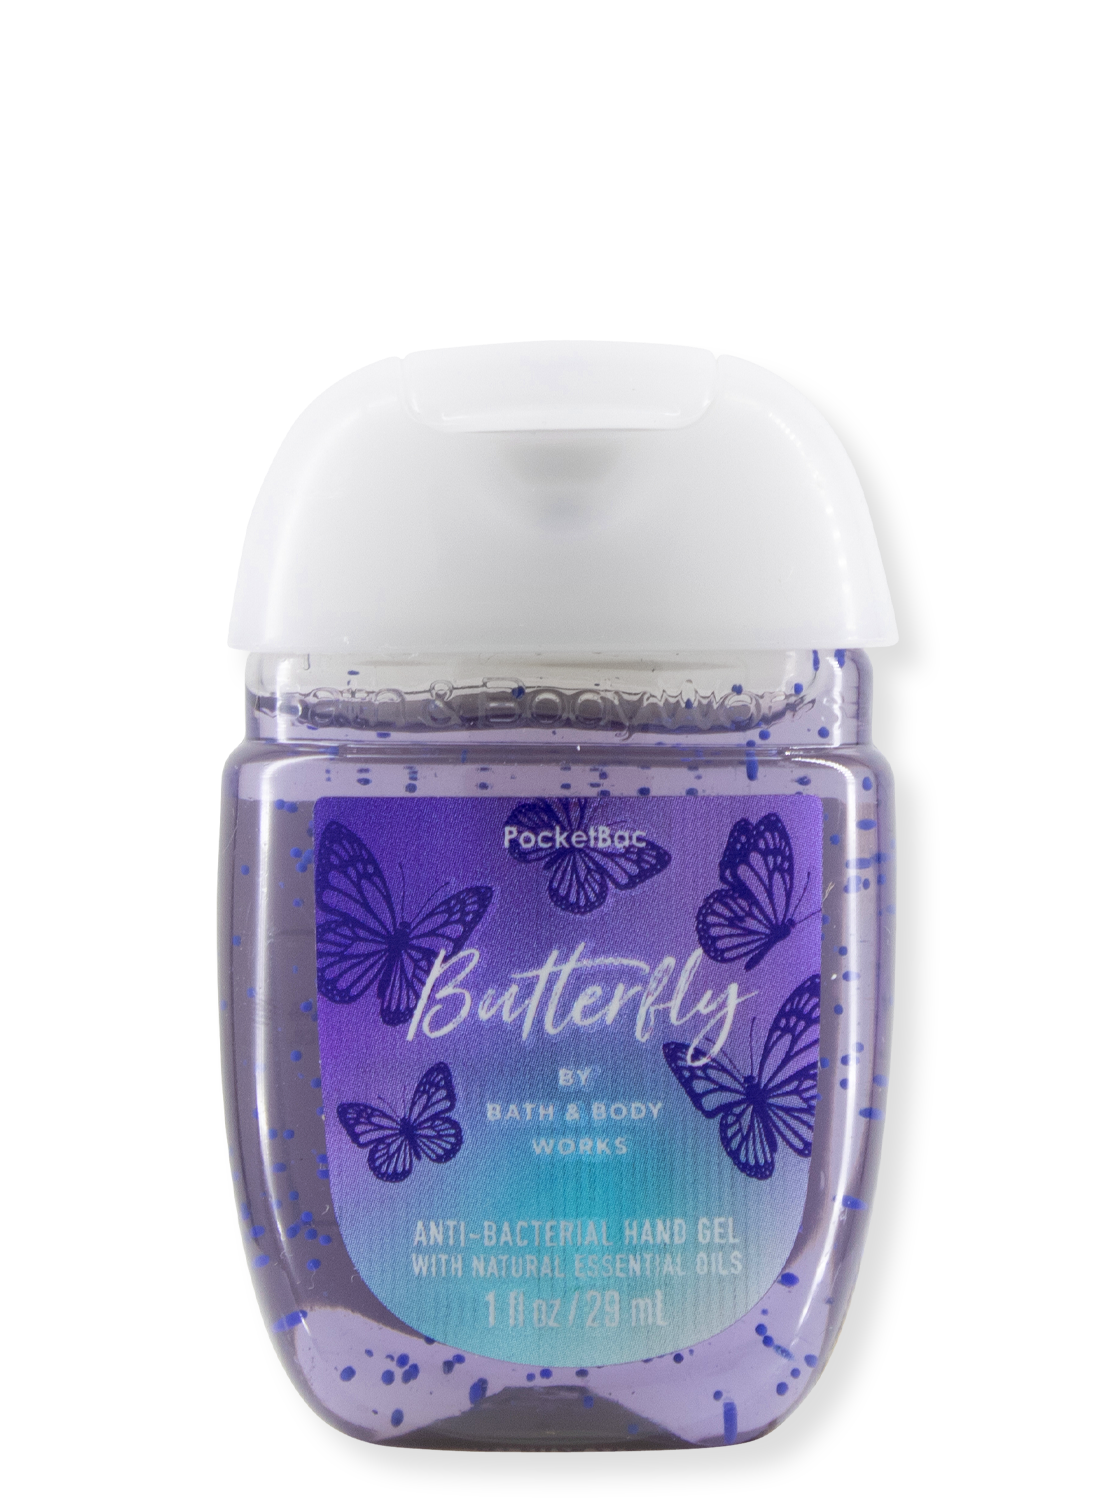 Hand disinfection gel - butterfly - 29ml